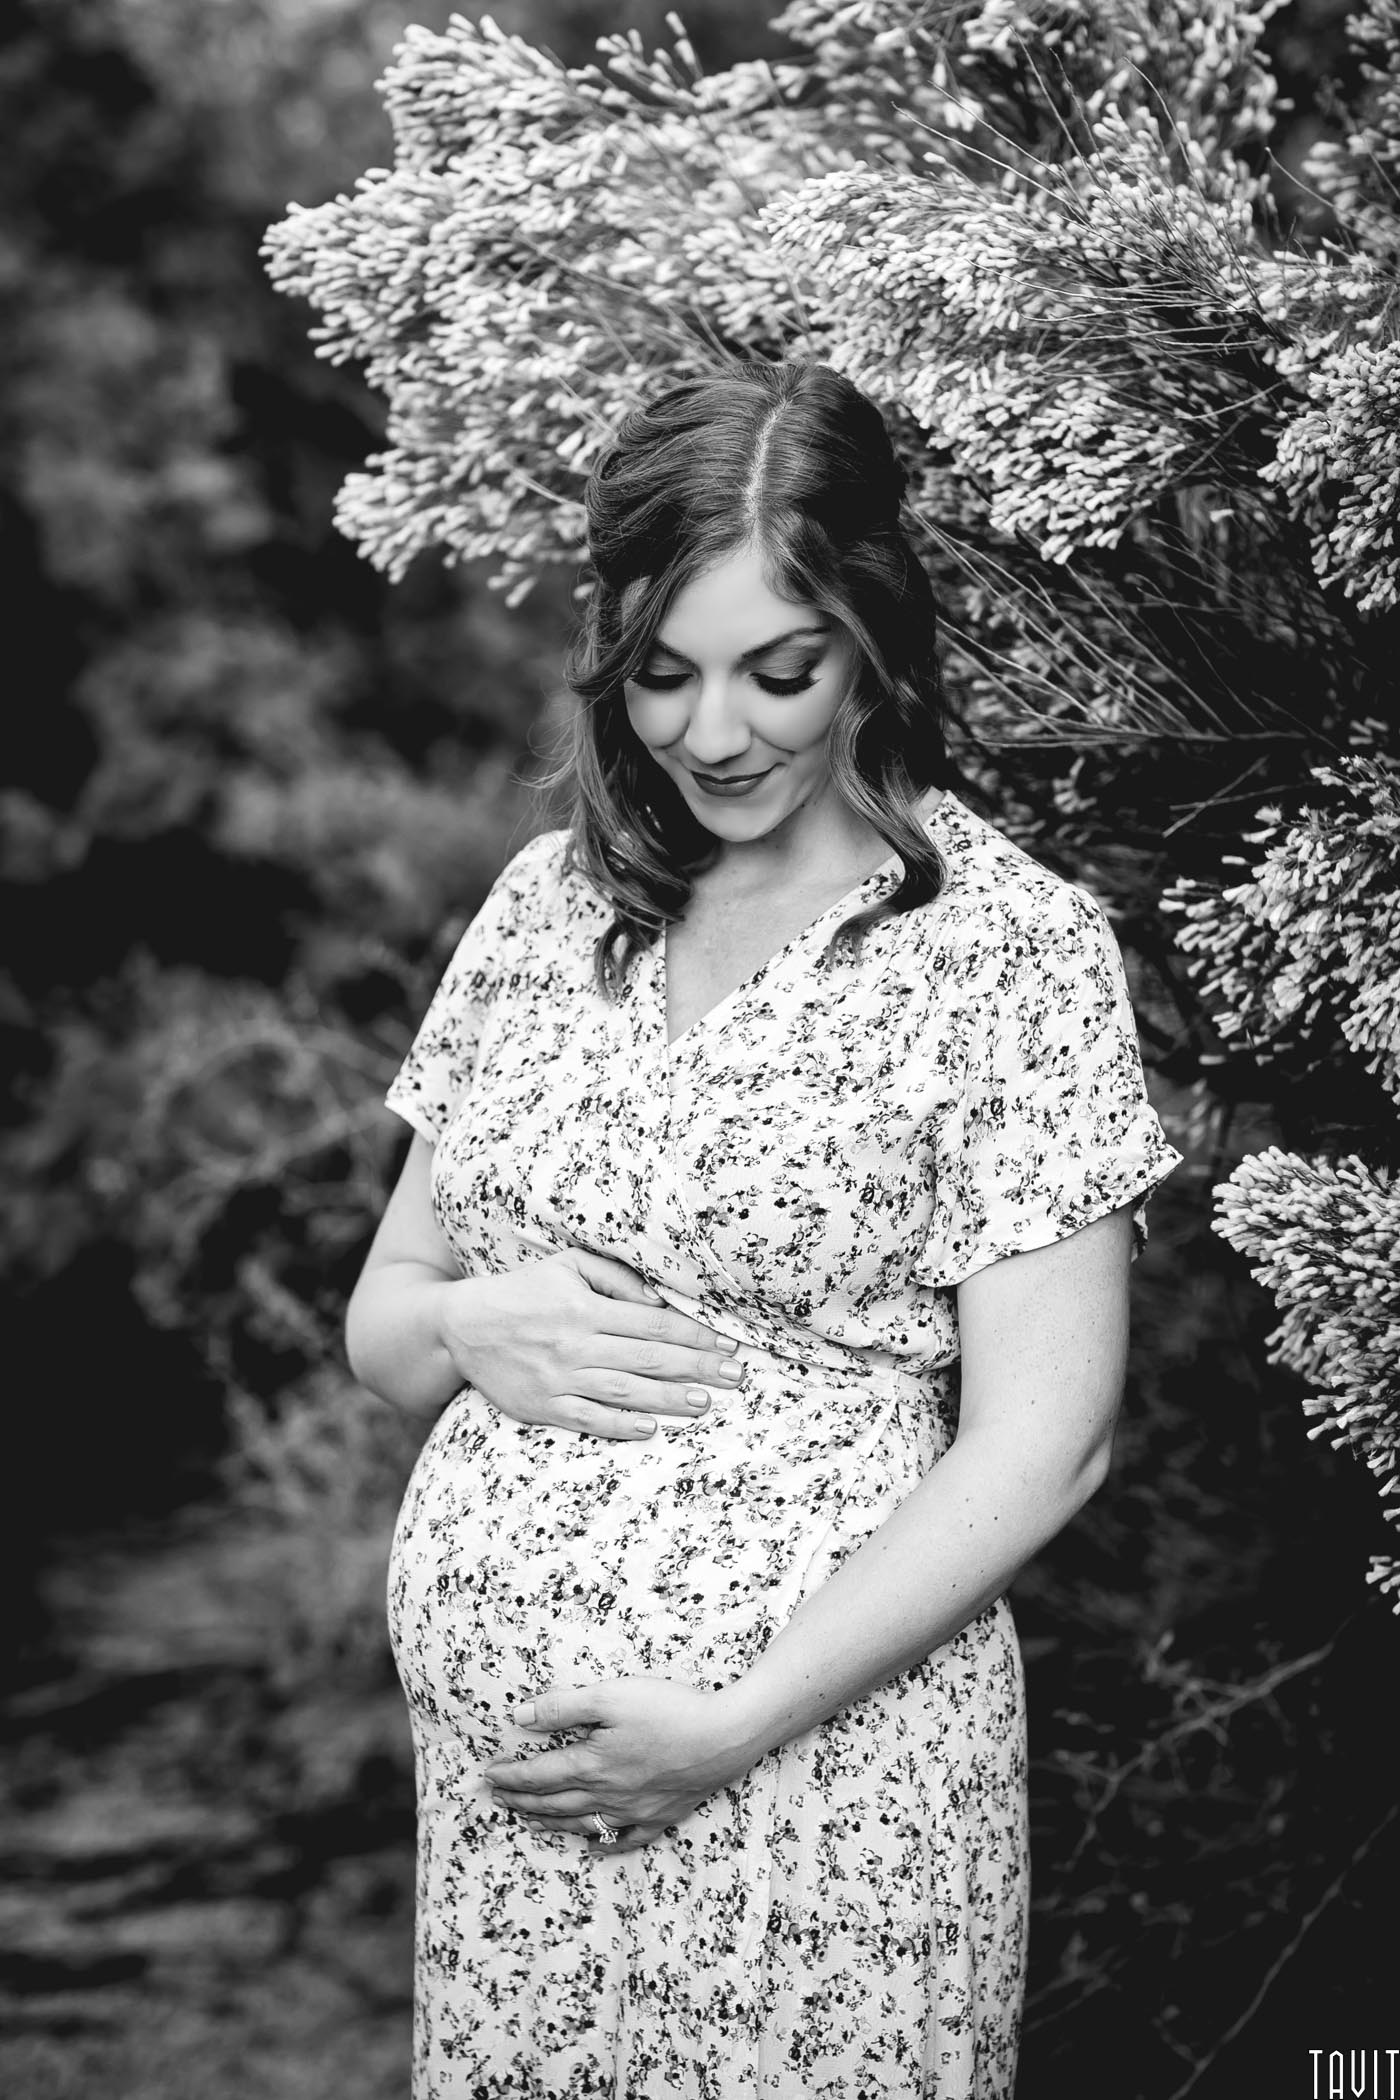 Woman looking down holding tummy for maternity shoot black and white